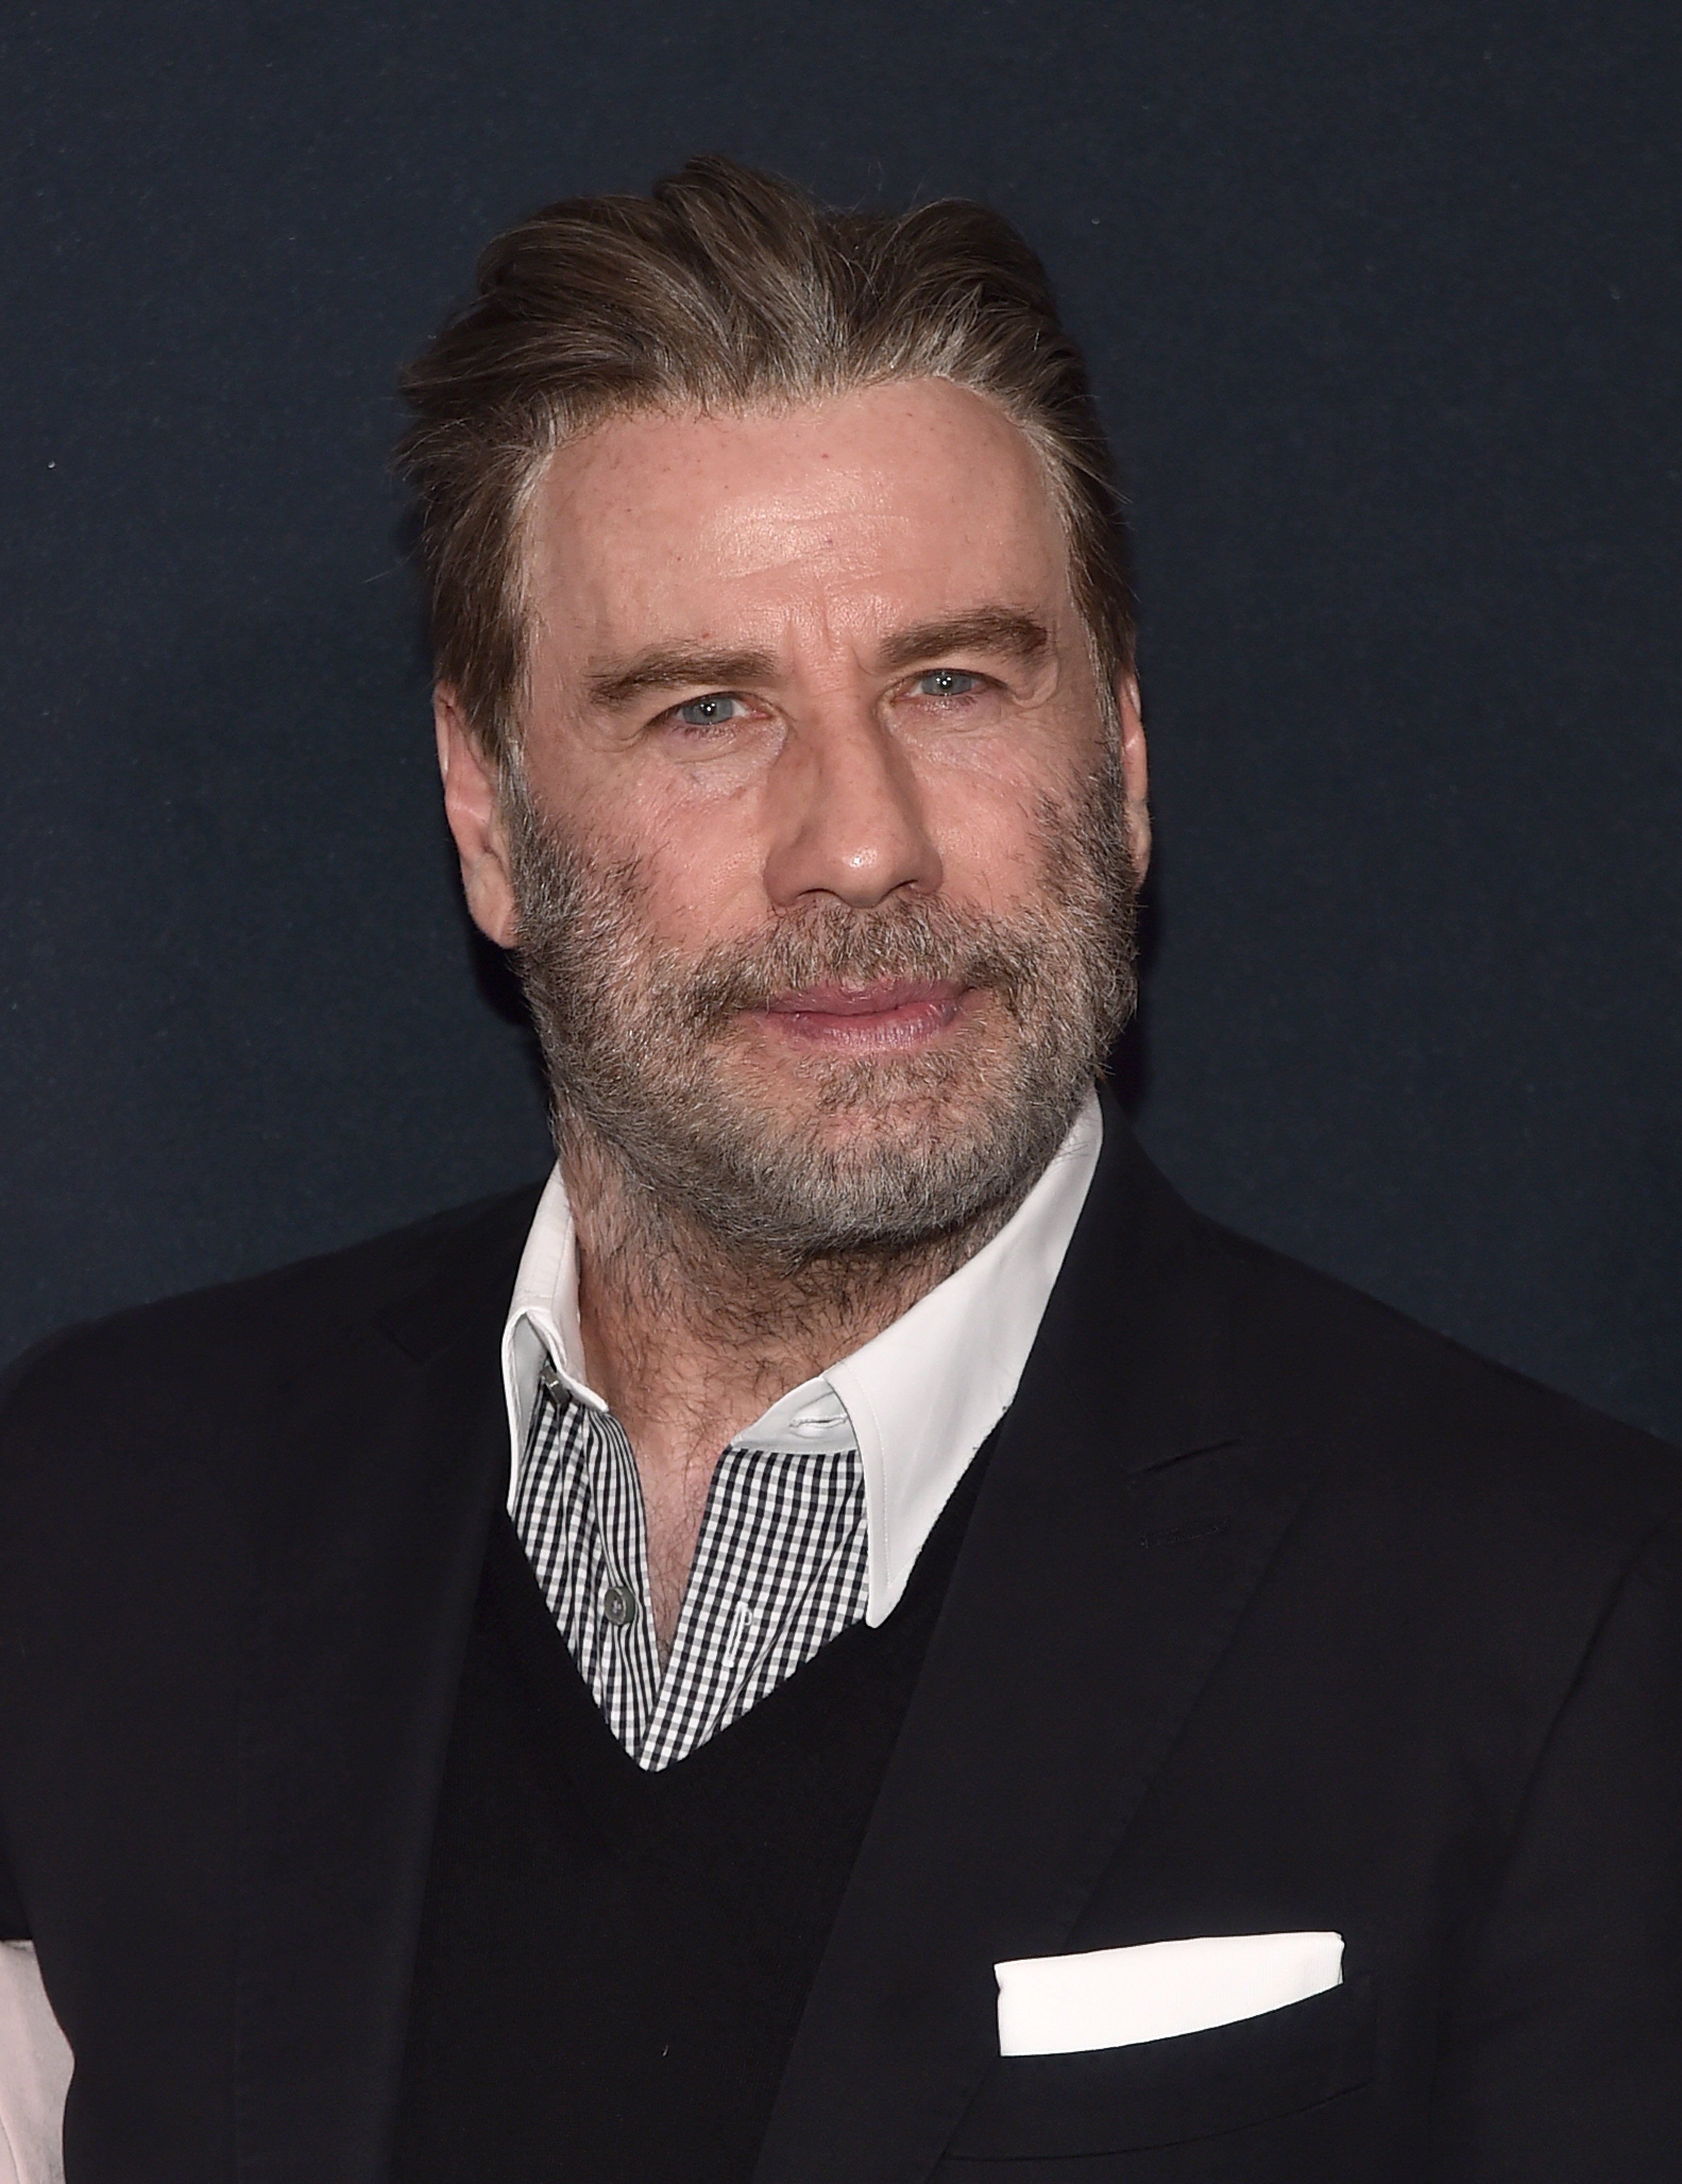 John Travolta Shares Rare Childhood Photo and Opens up about His